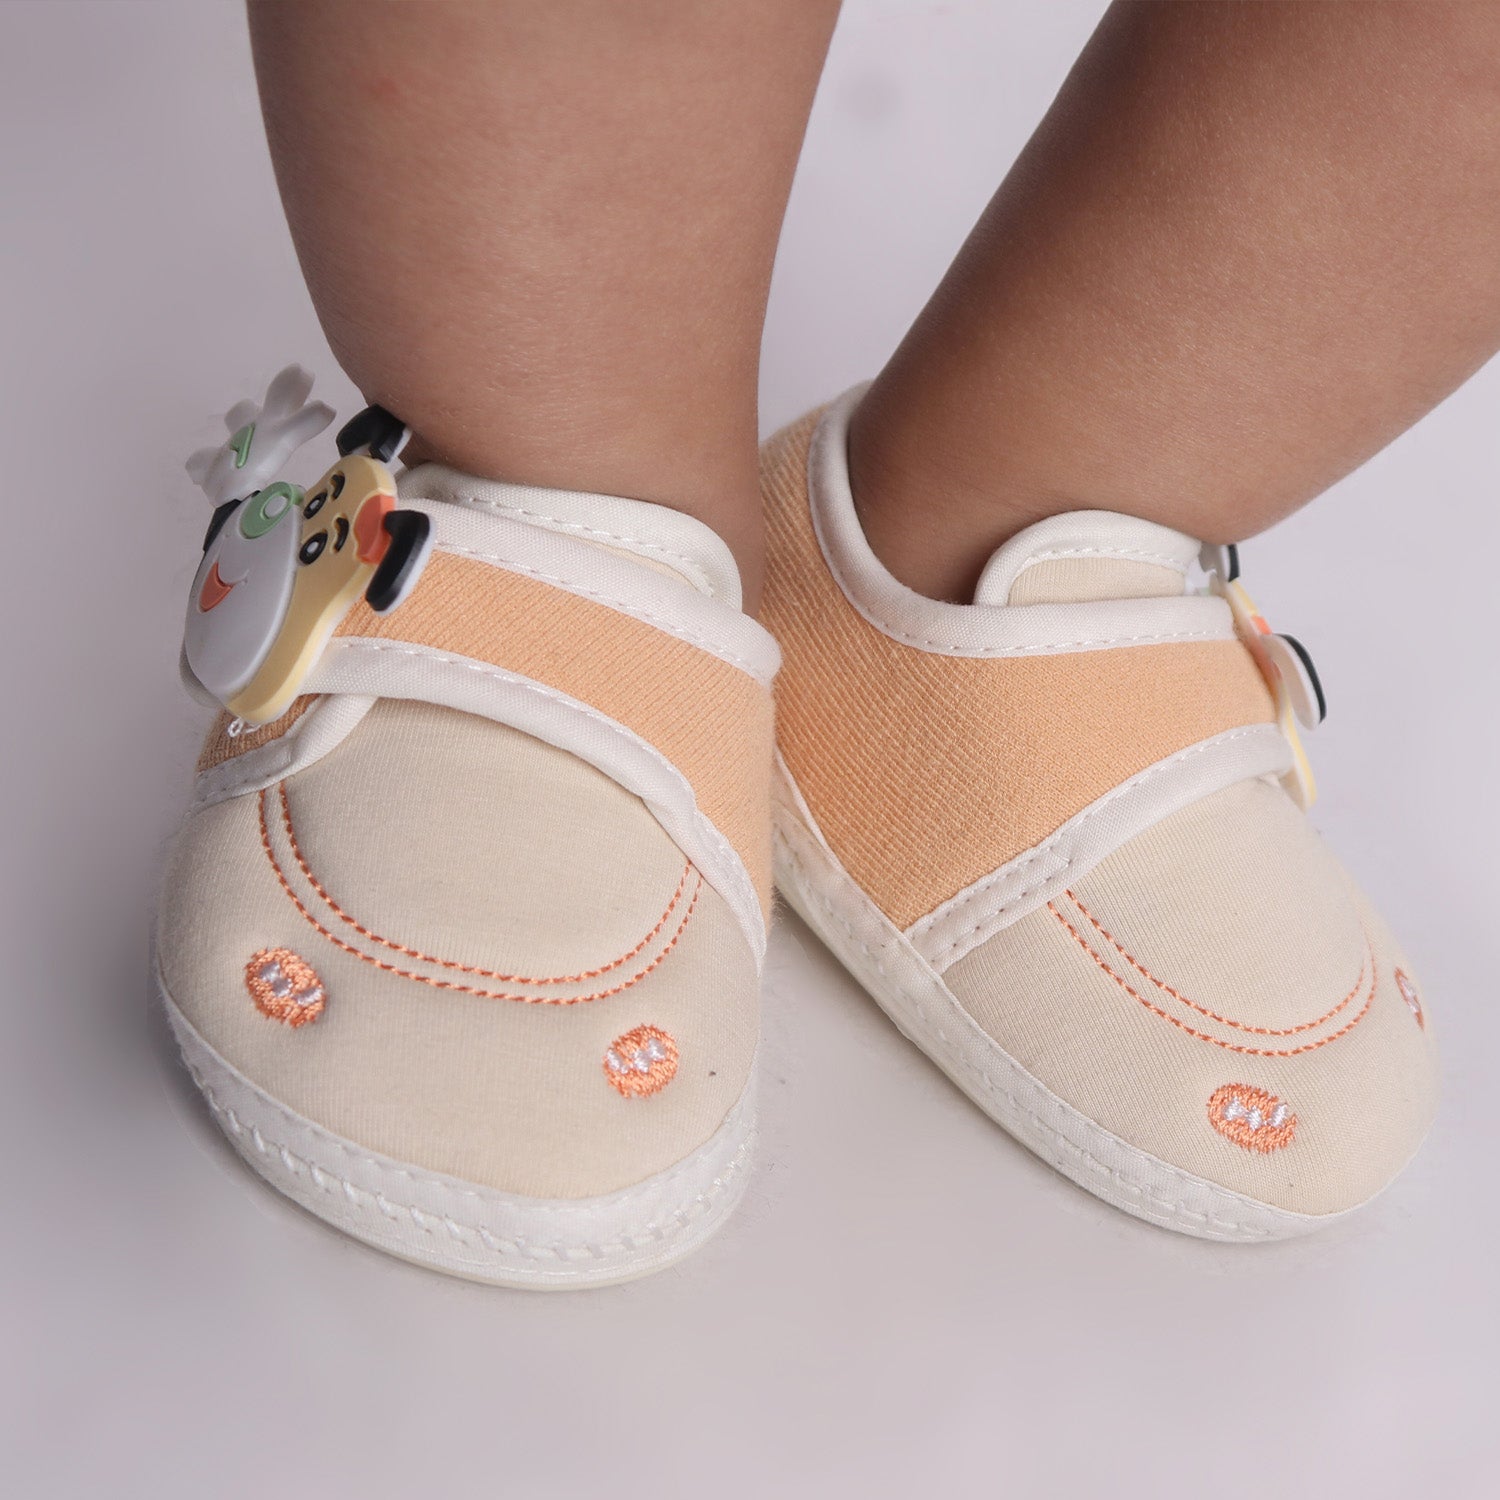 Baby Moo Puppy Face Soft Sole Anti-Slip Booties - Beige